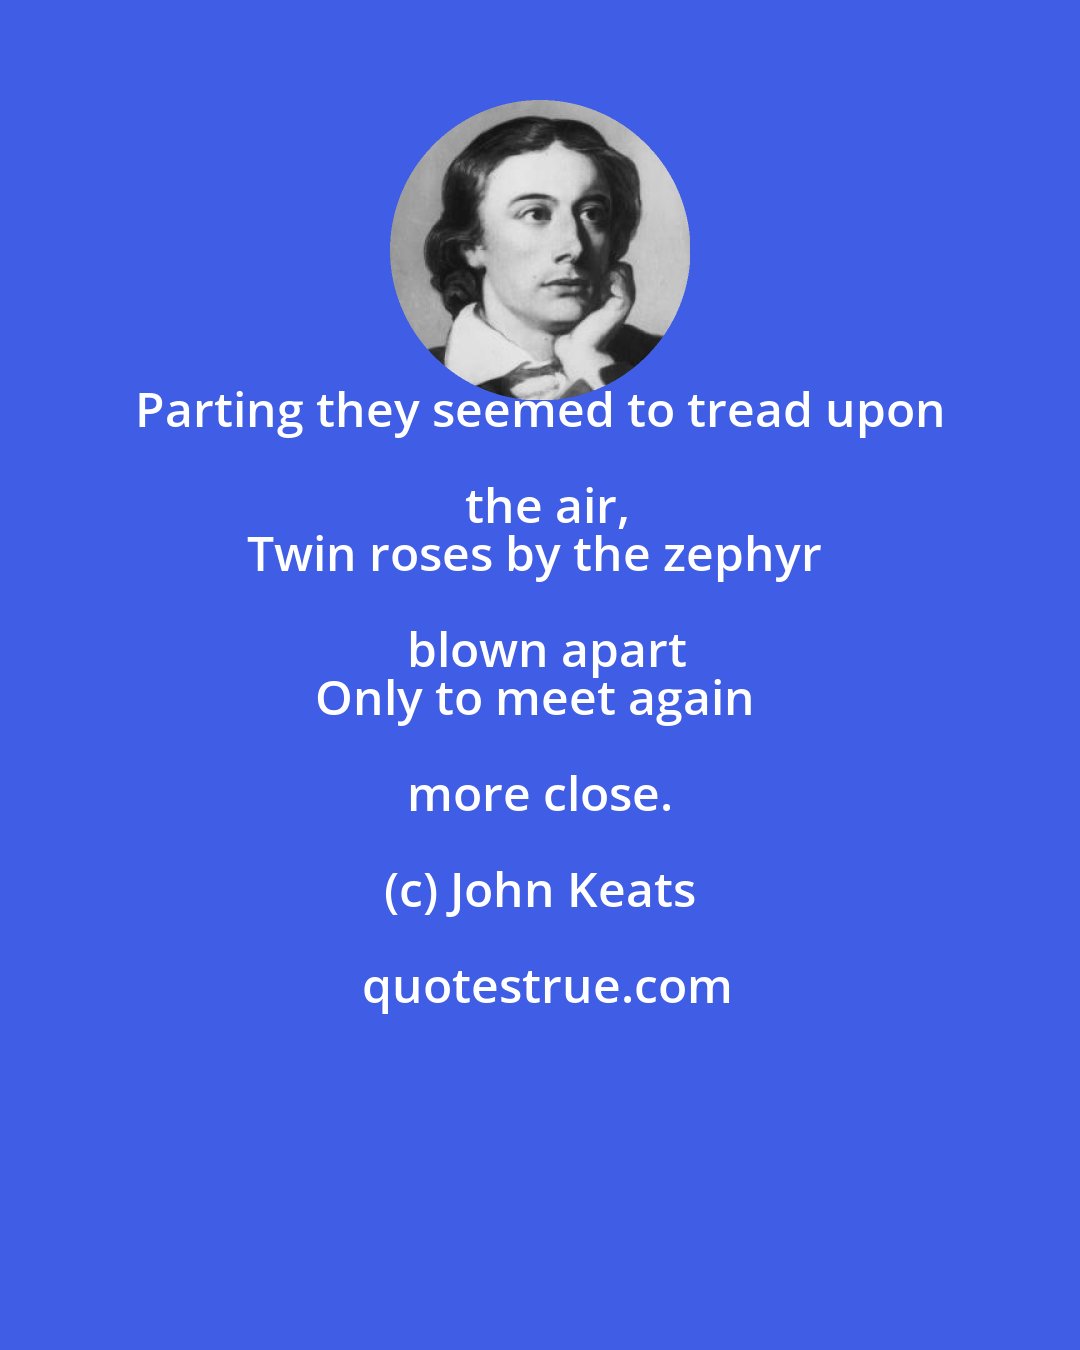 John Keats: Parting they seemed to tread upon the air,
Twin roses by the zephyr blown apart
Only to meet again more close.